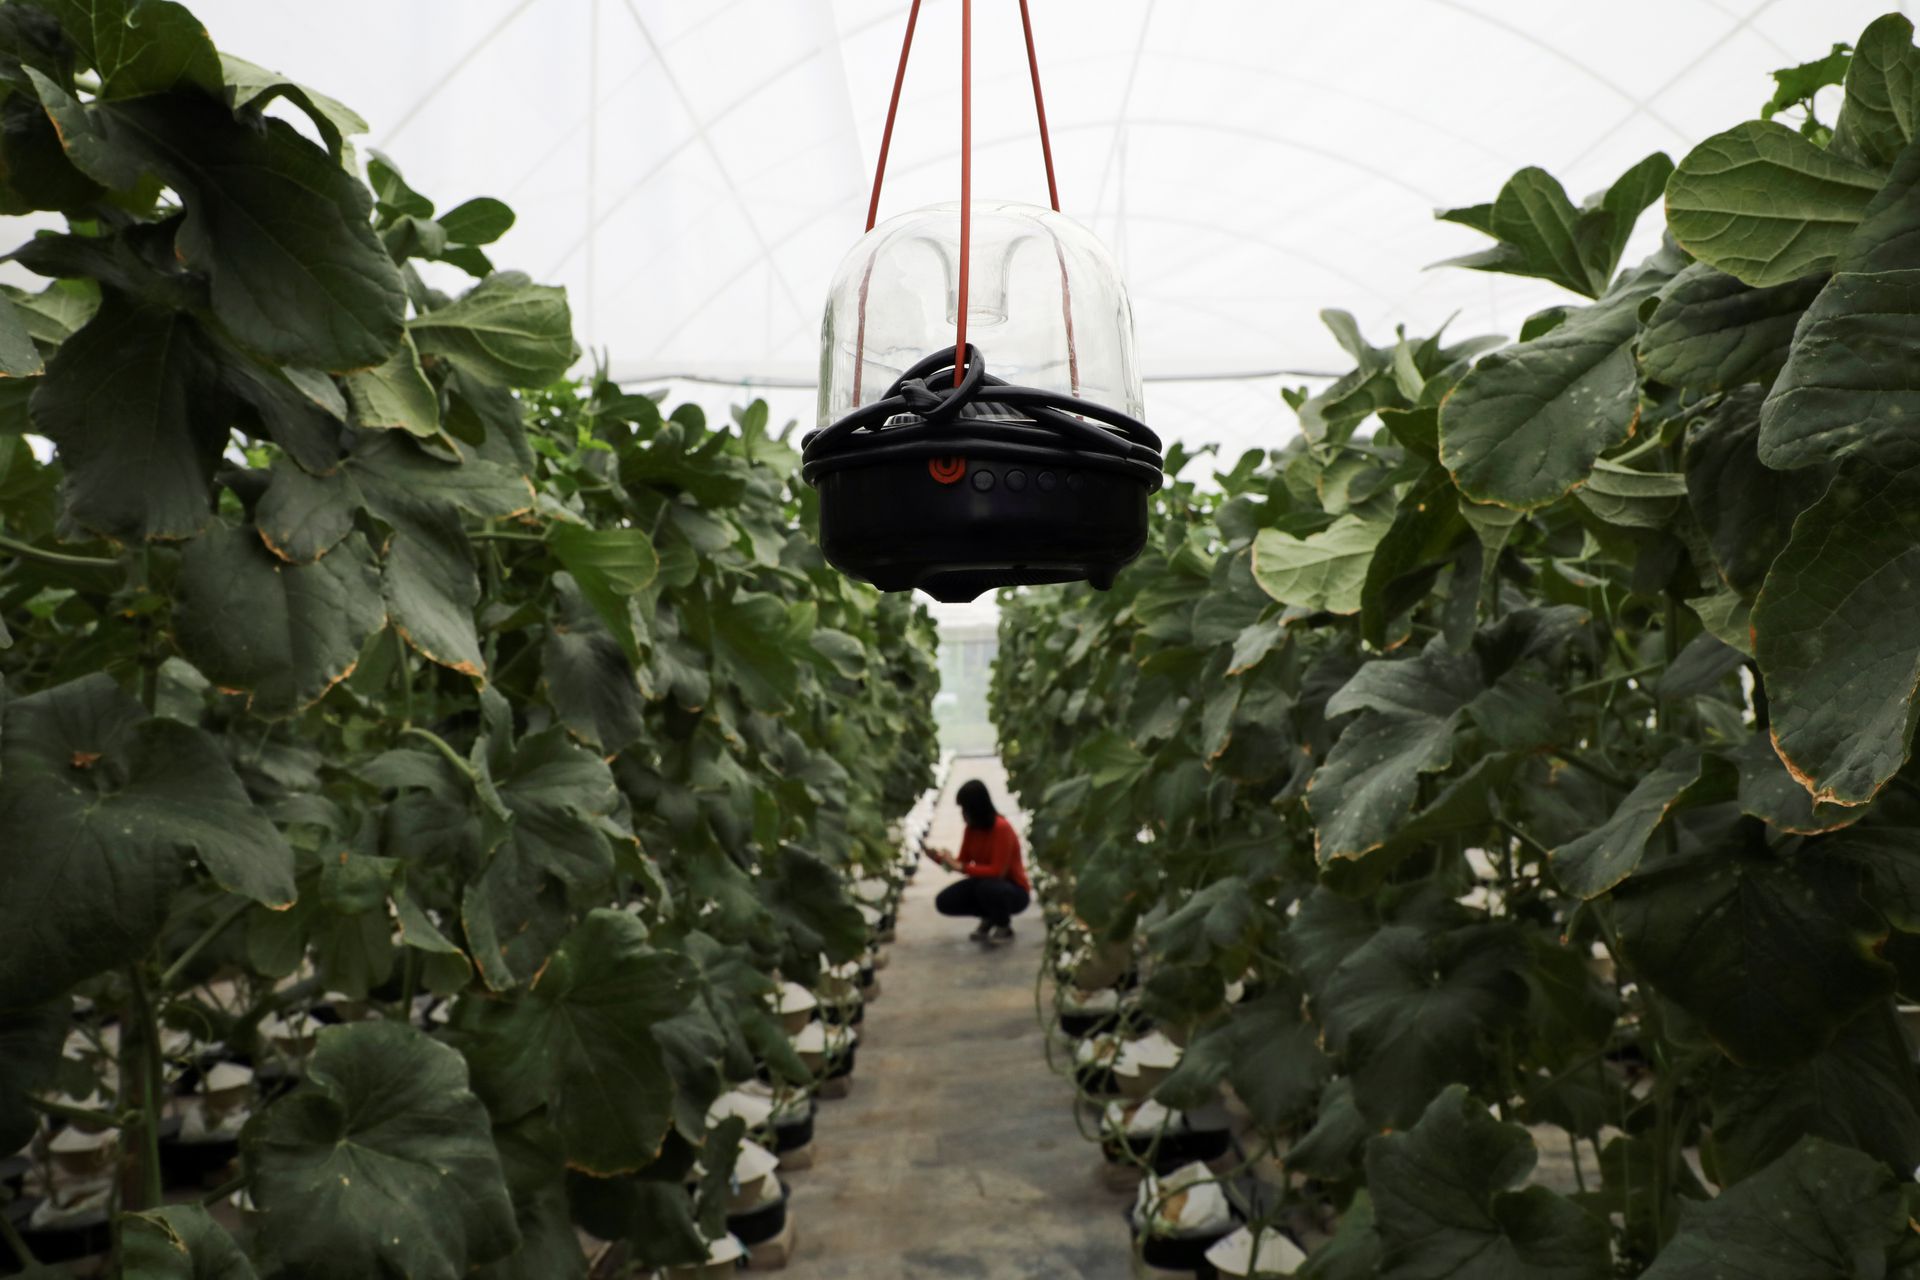 A speaker playing music for melon growth is seen at the Mono Farm in Putrajaya, Malaysia April 8, 2021. Photo: Reuters